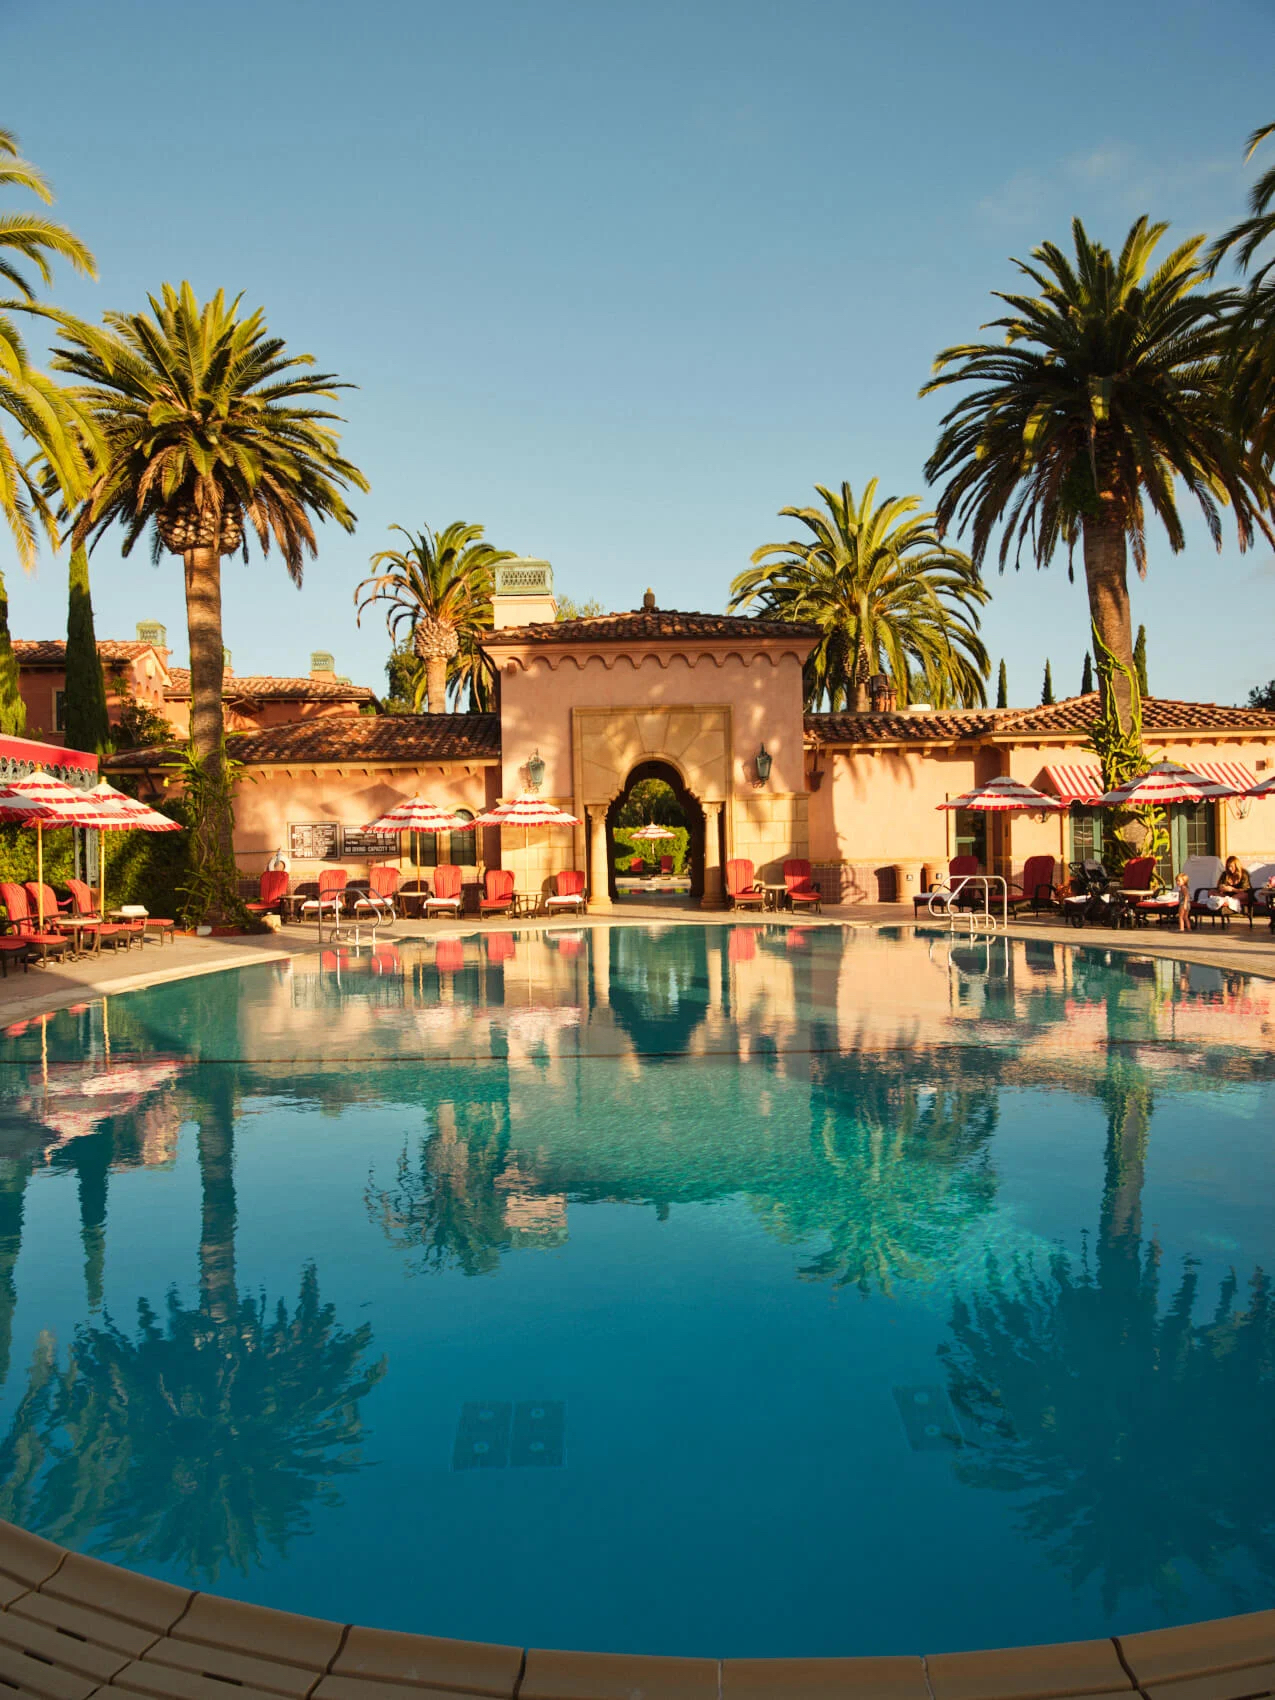 The main pool at the Fairmont Grand Del Mar